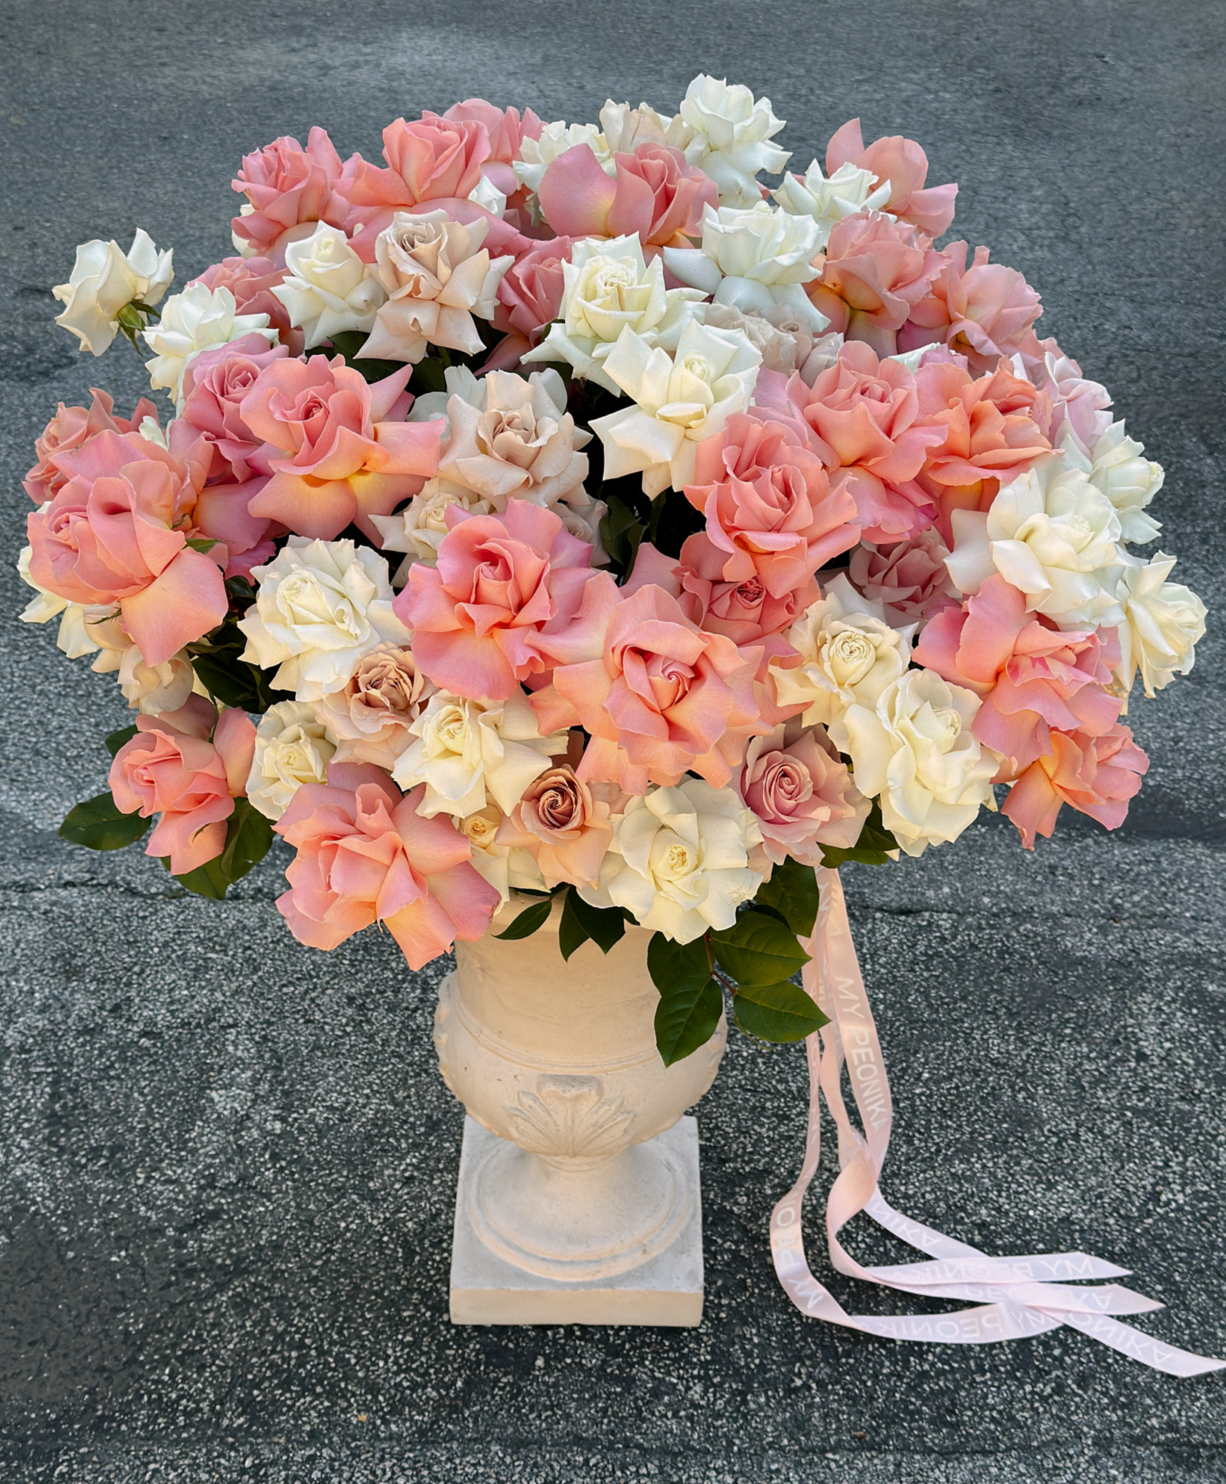 Floral arrangements “From Paris with love” - French roses